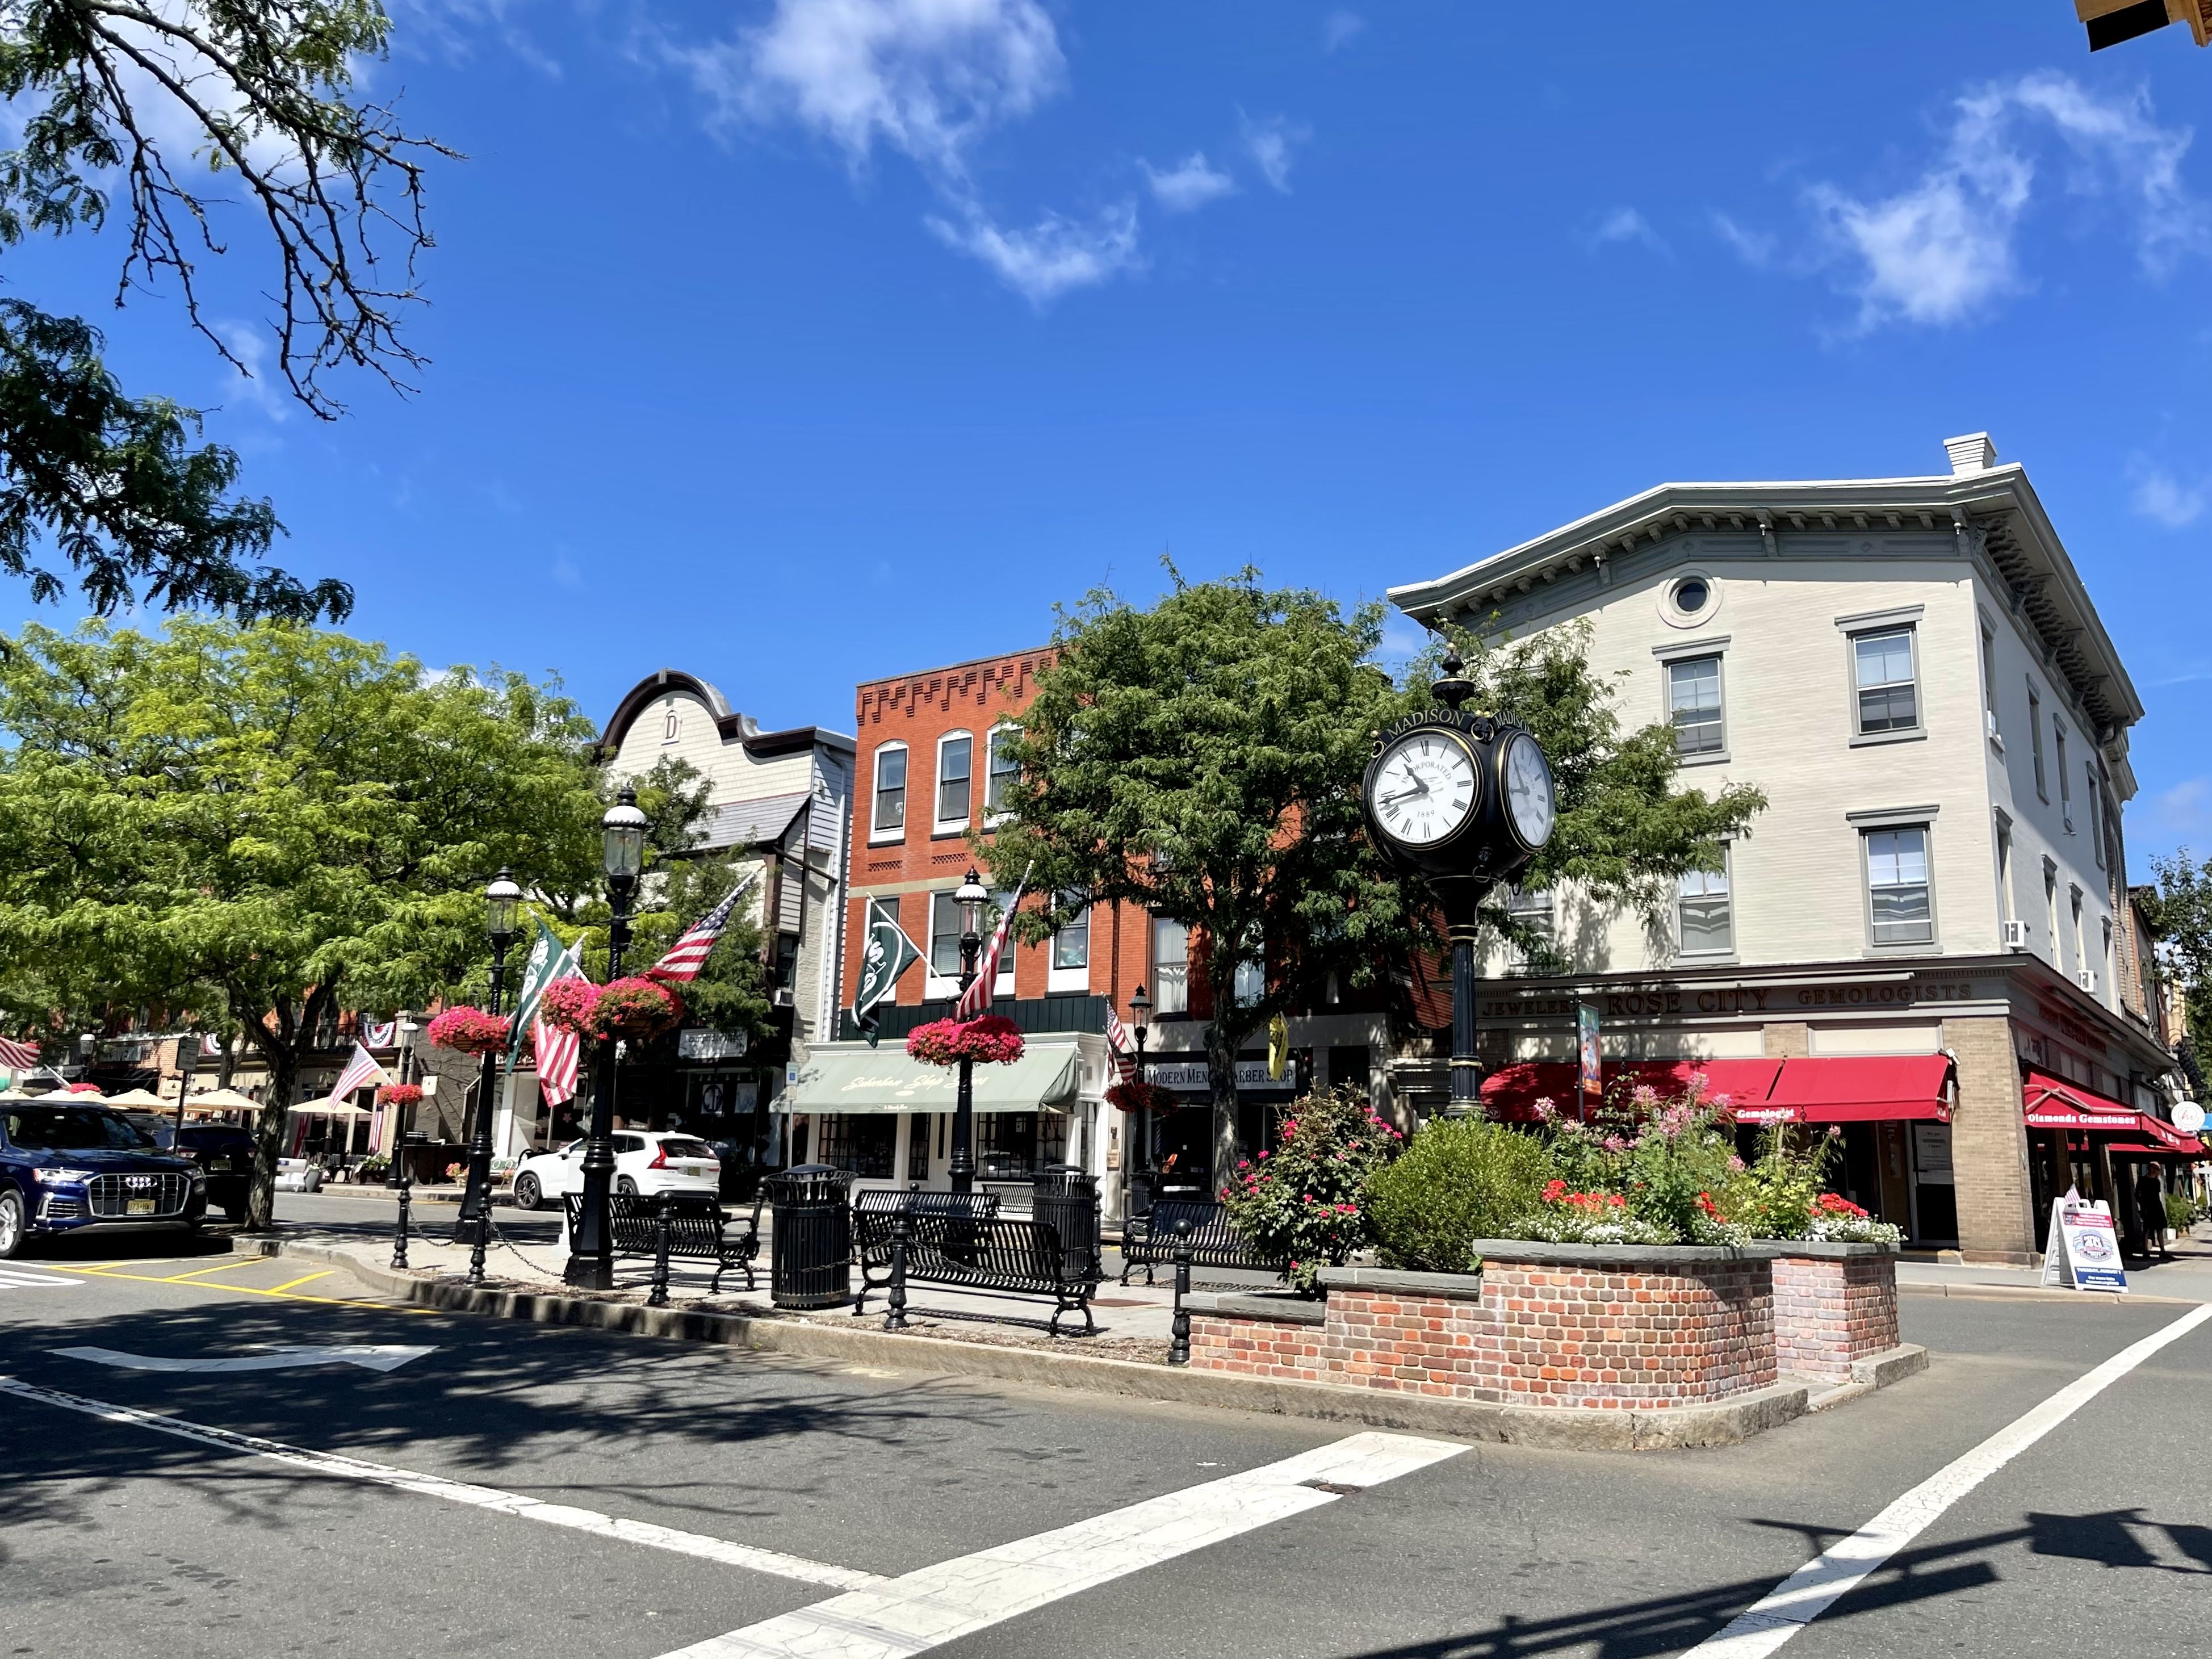 Shopping Downtown in Millburn, NJ - Town Square Publications